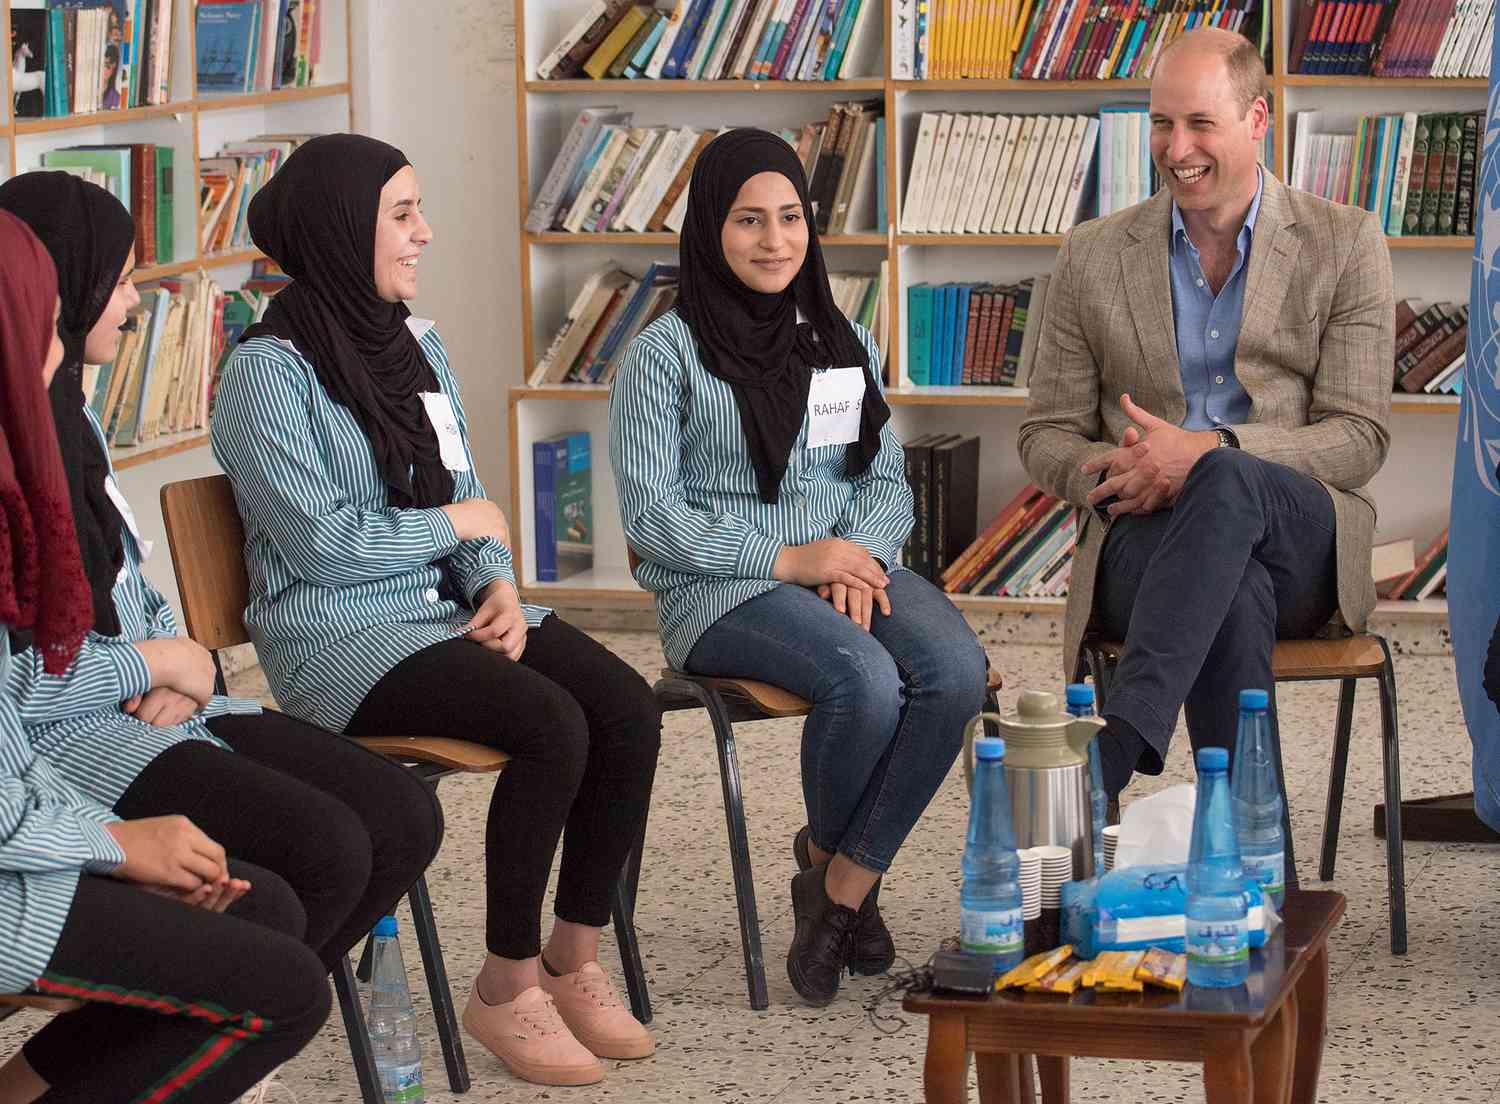 The Duke Of Cambridge Visits Jordan, Israel And The Occupied Palestinian Territories